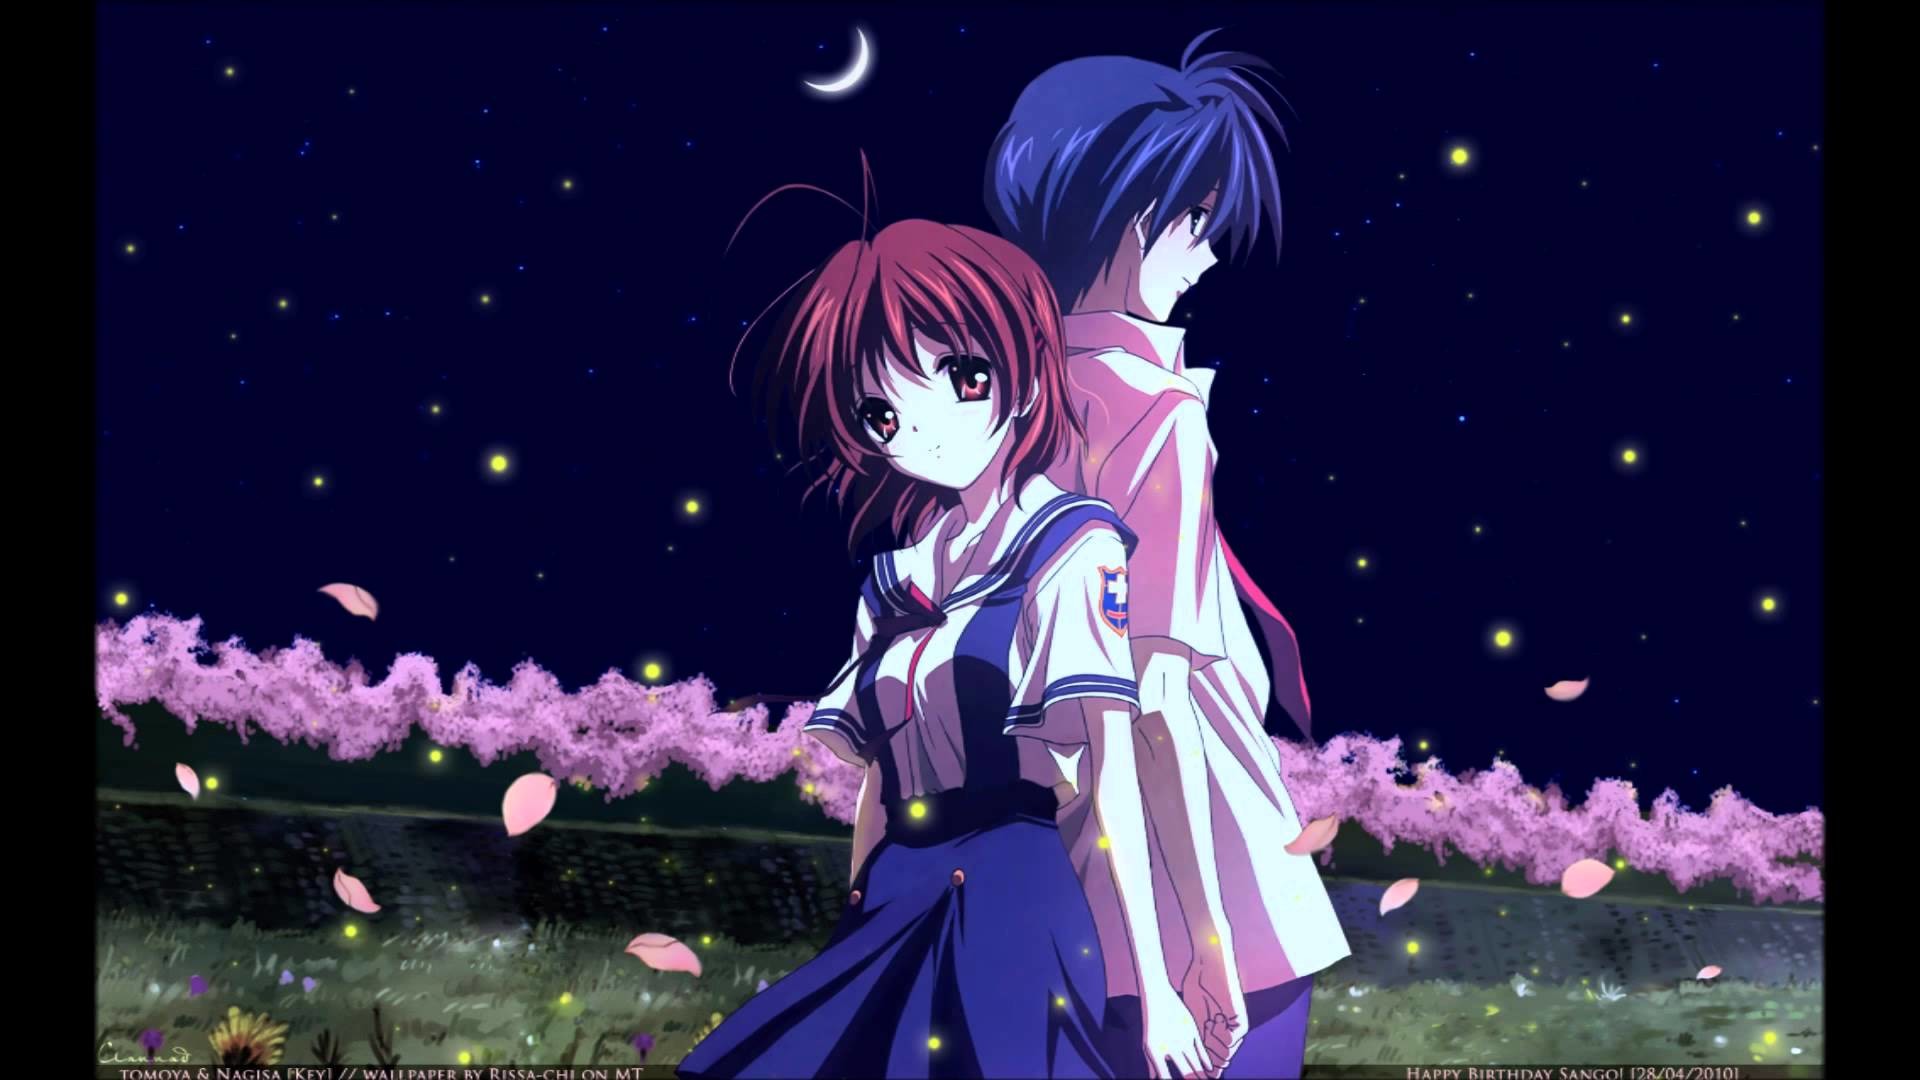 1920x1080 CLANNAD ~After Story~ ED - "Torch" by Lia Full Version (HD)